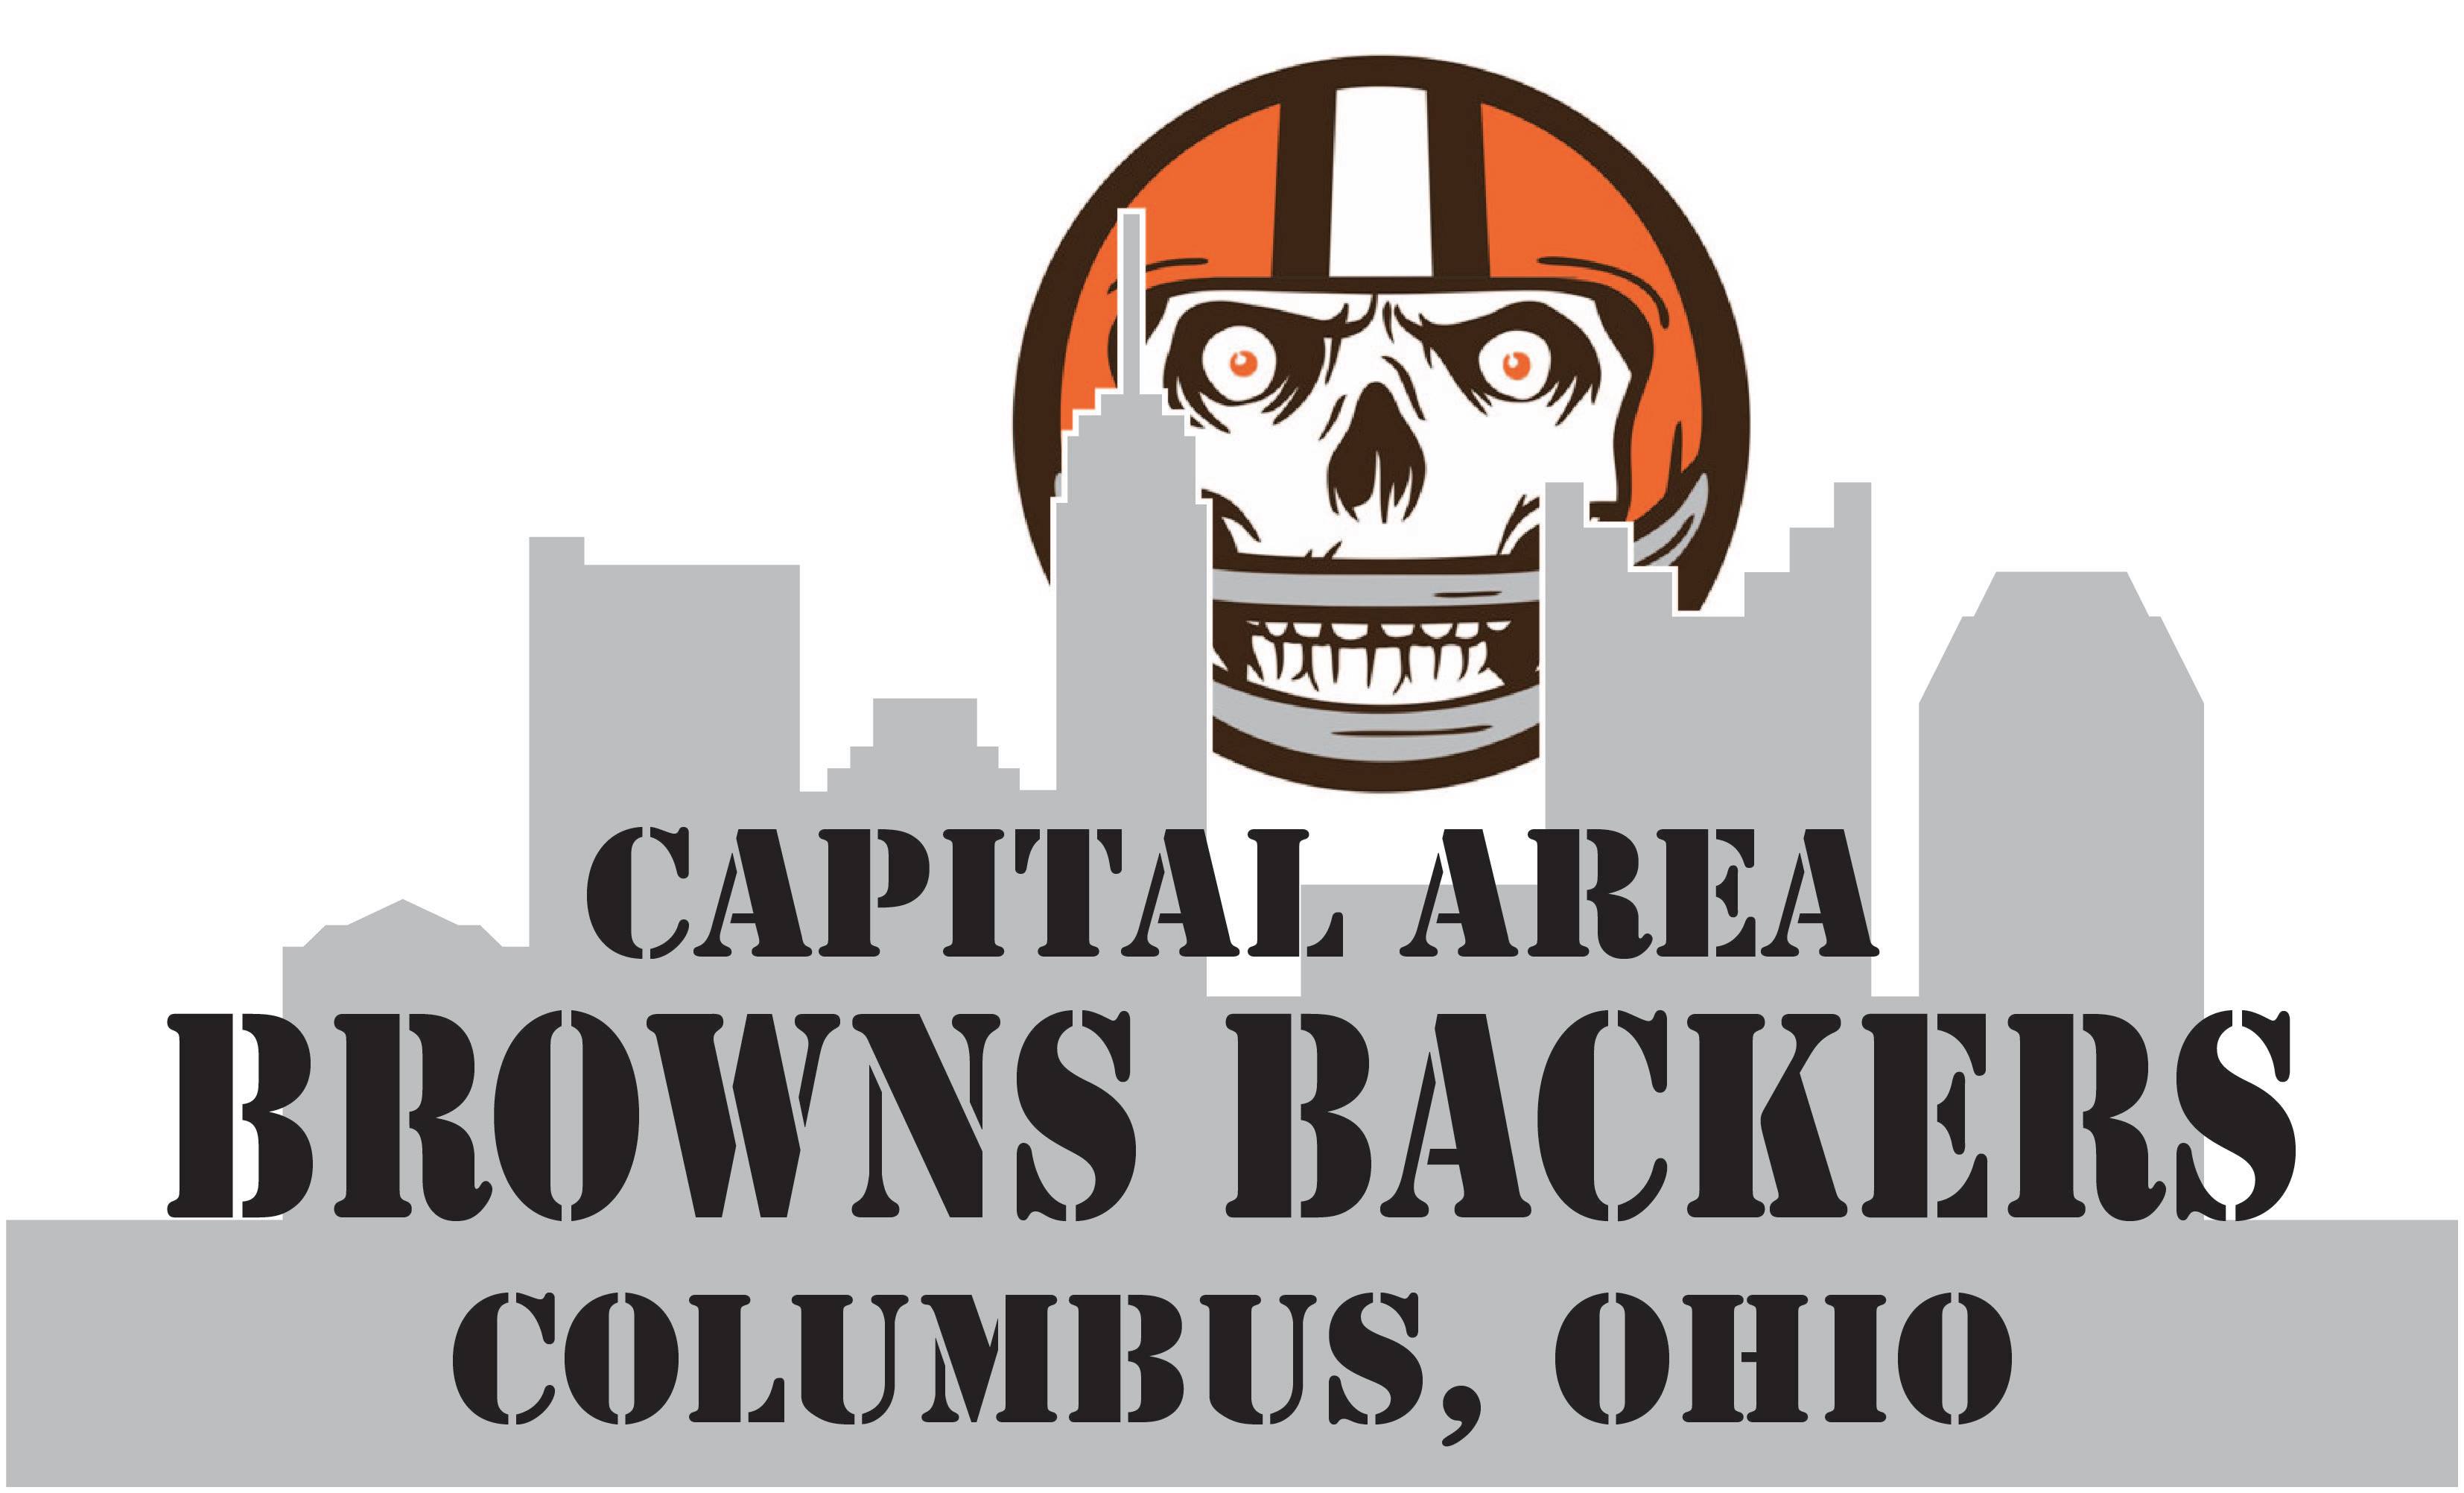 Capital Area Browns Backers